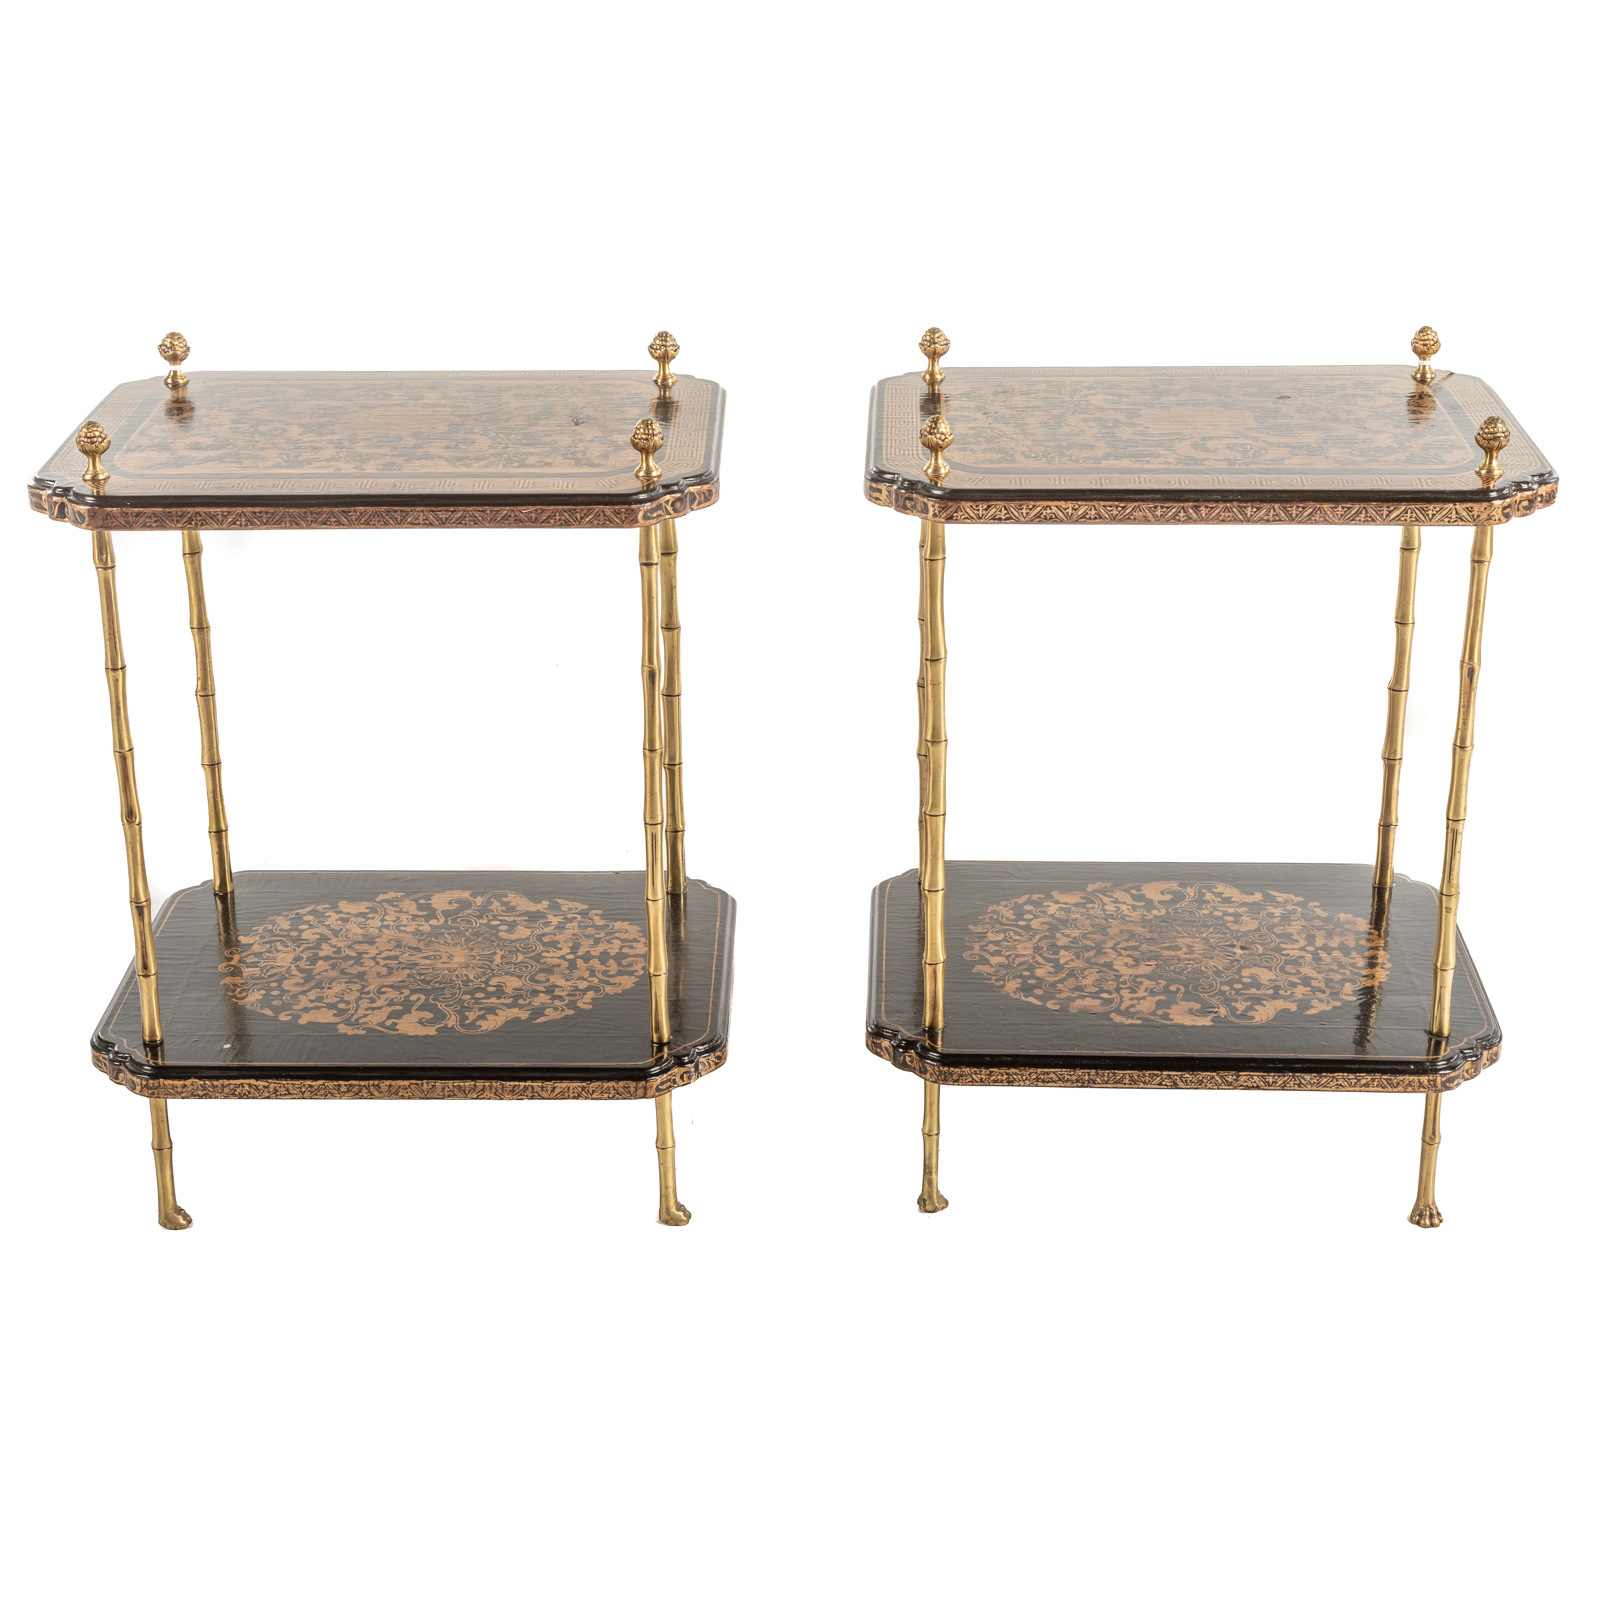 A PAIR OF FRENCH MARQUETRY TWO-TIER